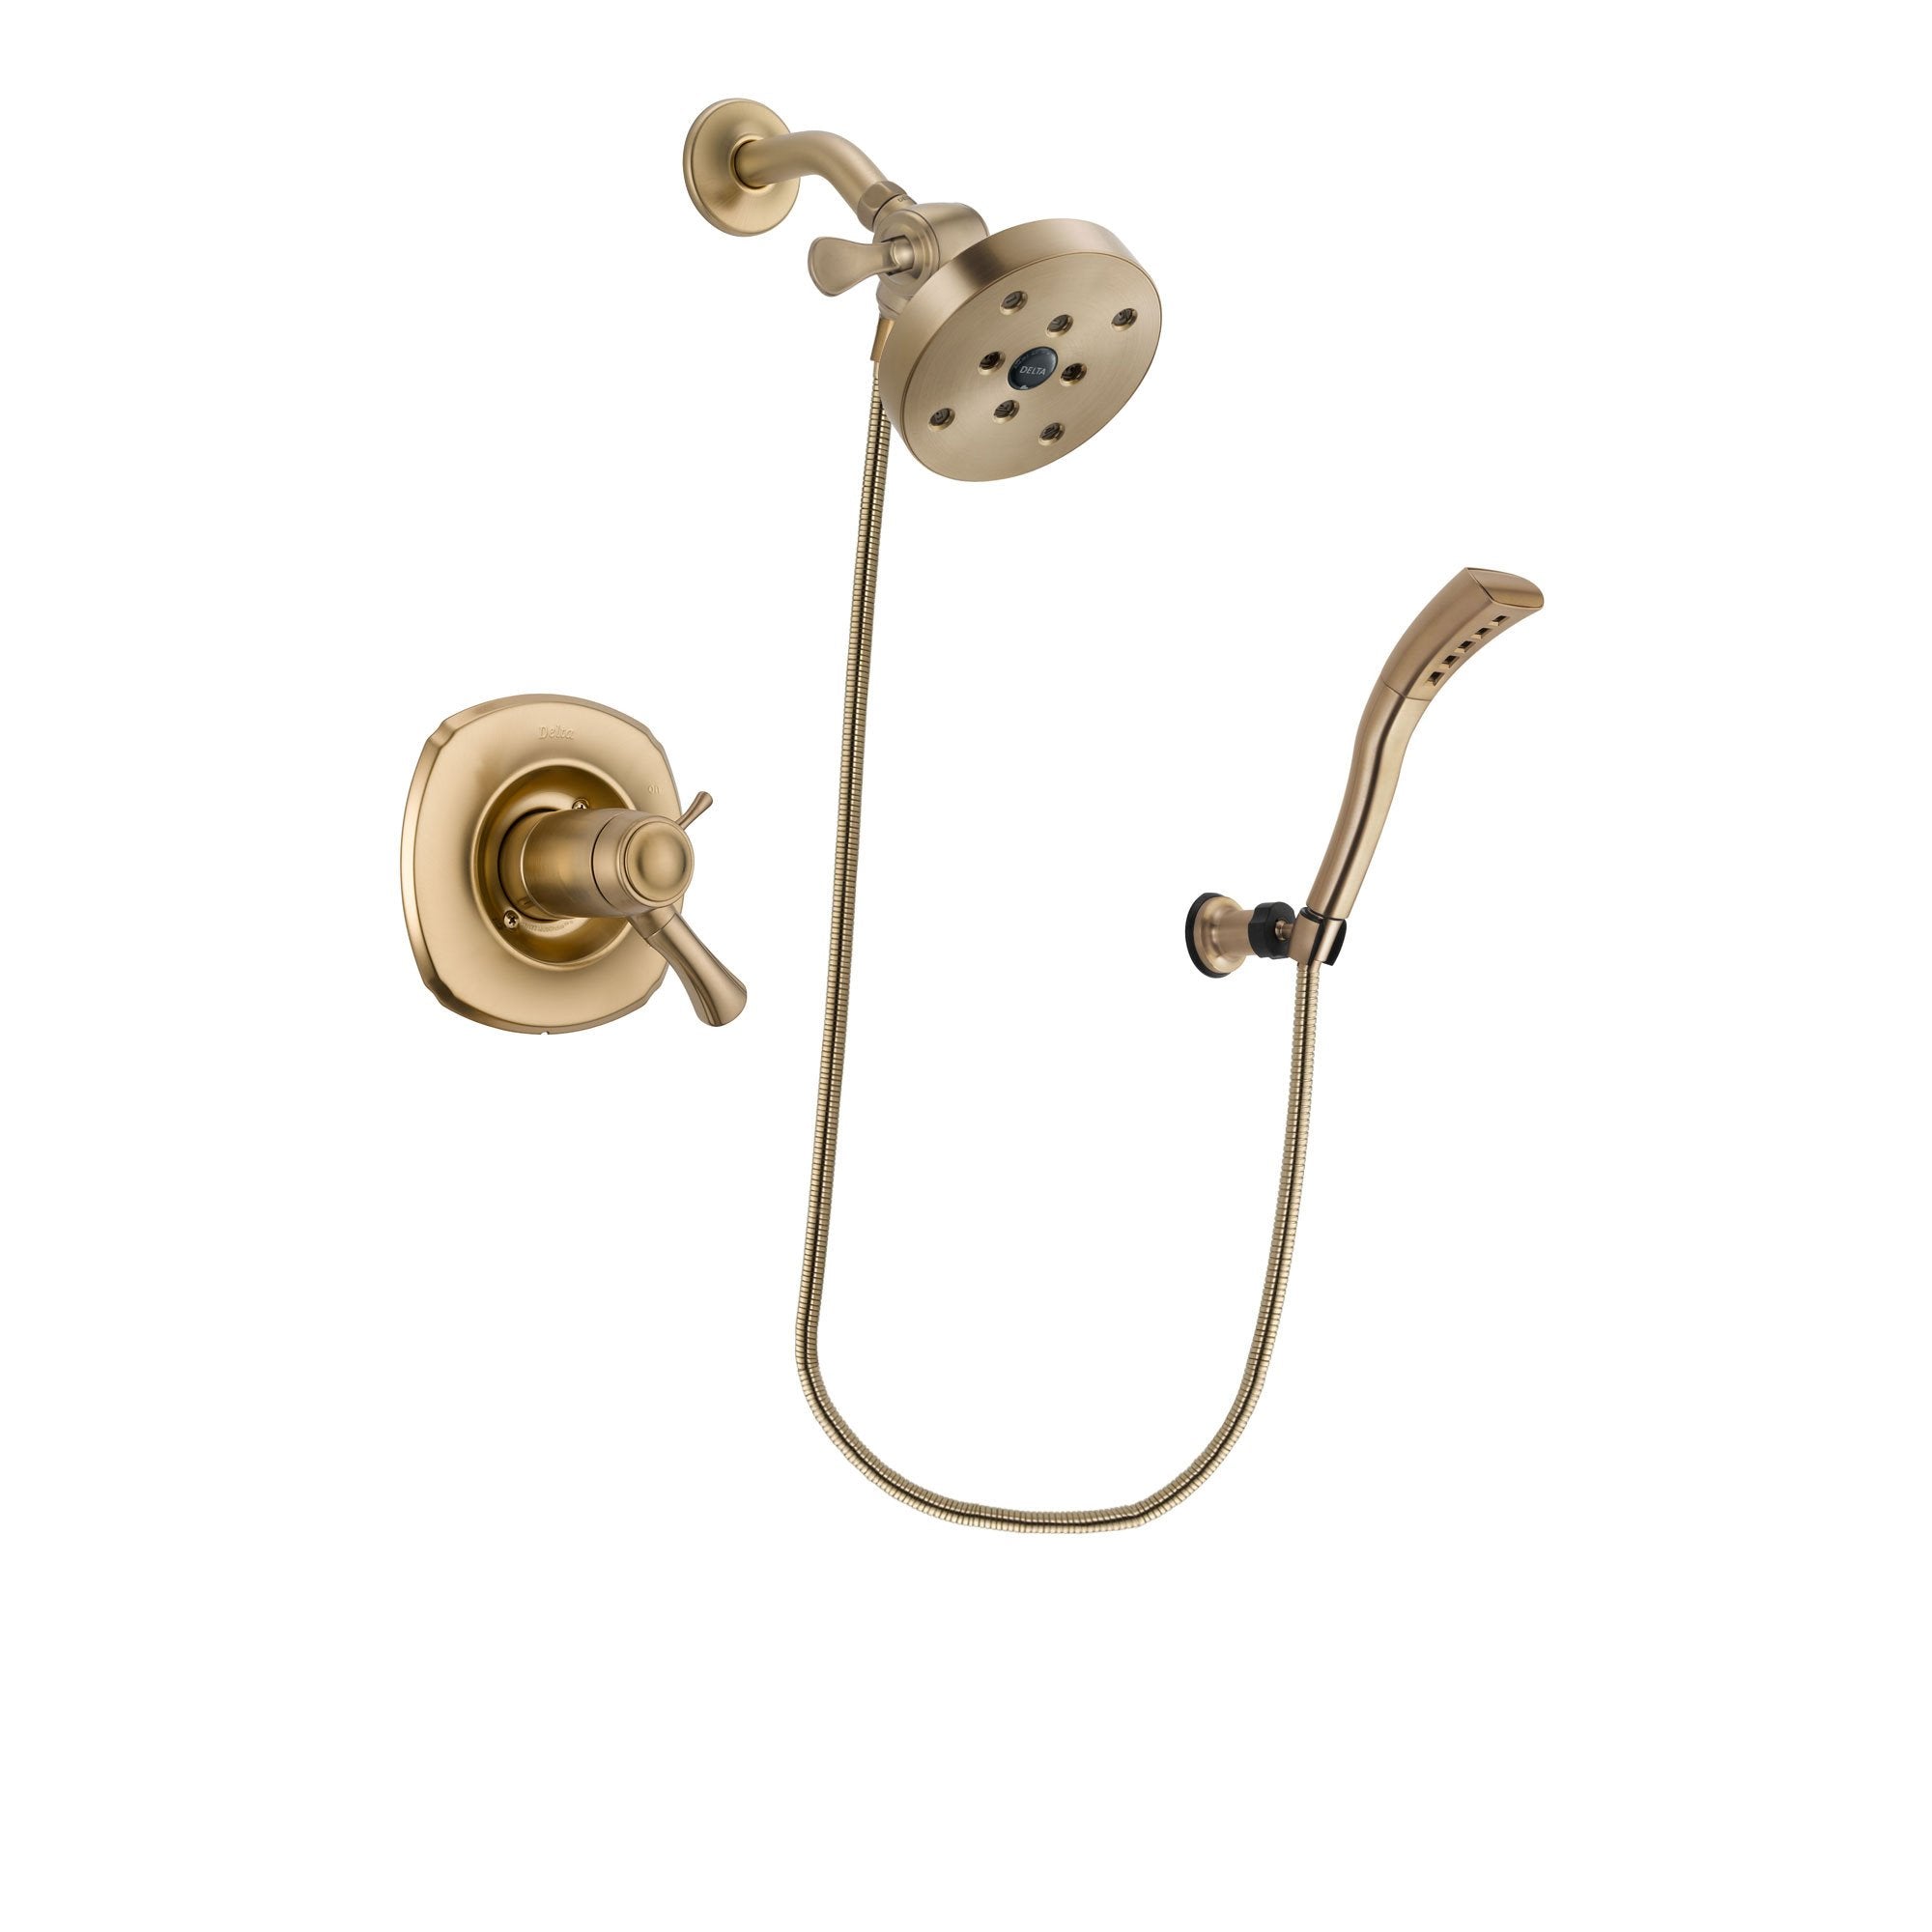 Delta Addison Champagne Bronze Finish Thermostatic Shower Faucet System Package with 5-1/2 inch Showerhead and Modern Wall Mount Personal Handheld Shower Spray Includes Rough-in Valve DSP3712V